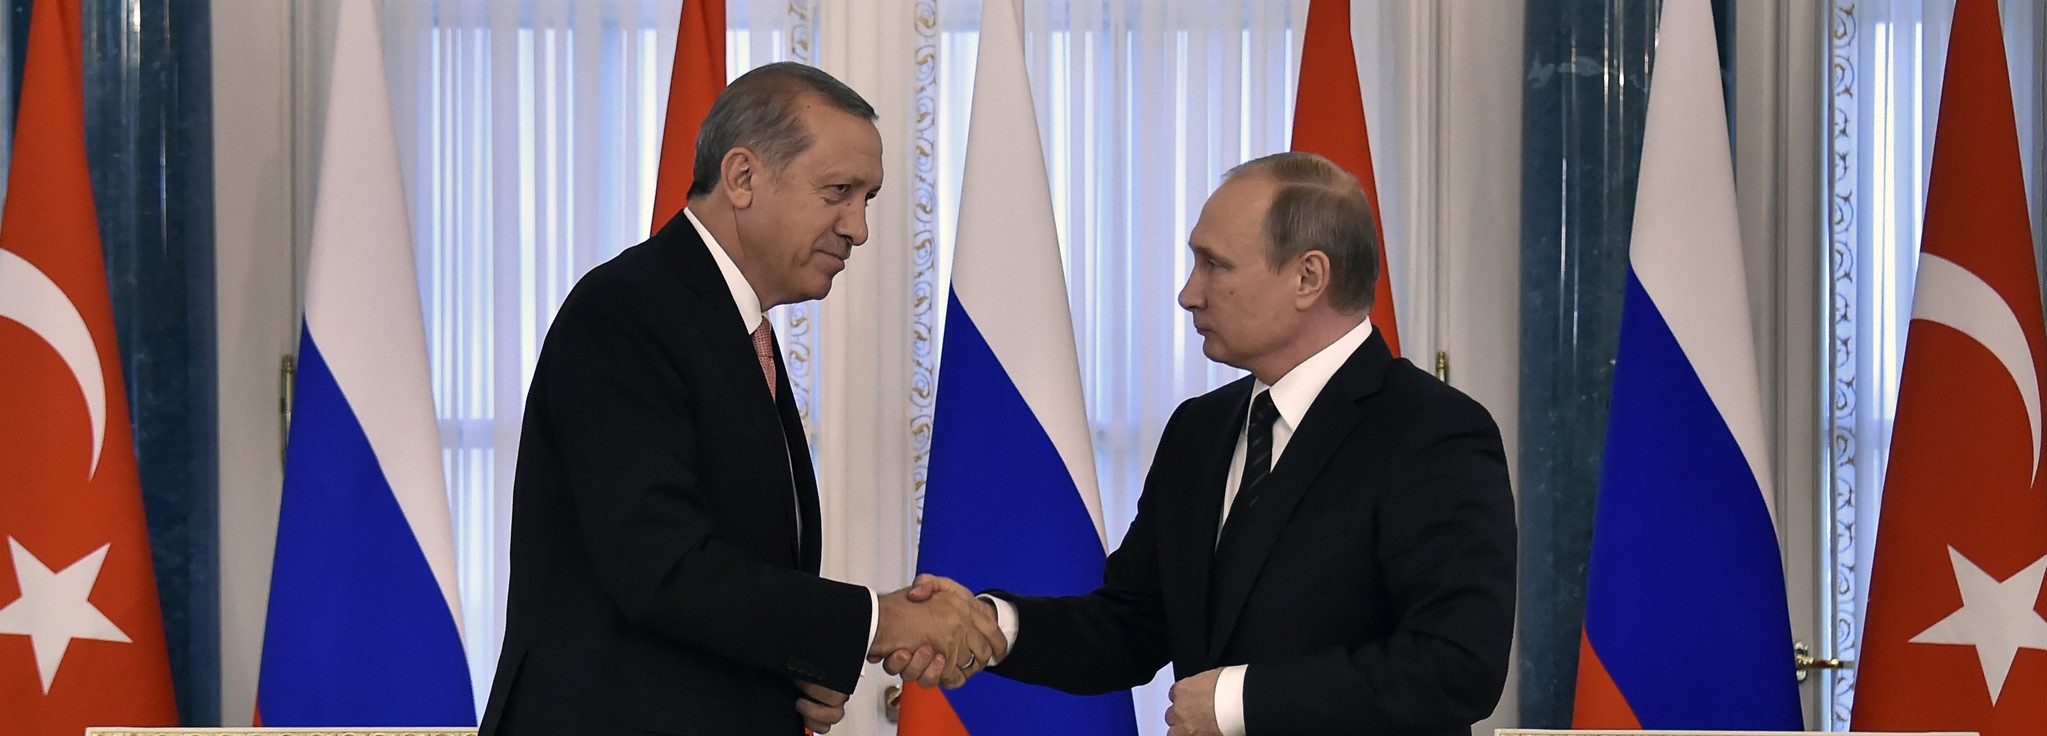 Russian President Vladimir Putin (R) shakes hands with his Turkish counterpart Recep Tayyip Erdou011fan during their press conference in Konstantinovsky Palace. (AFP Photo)